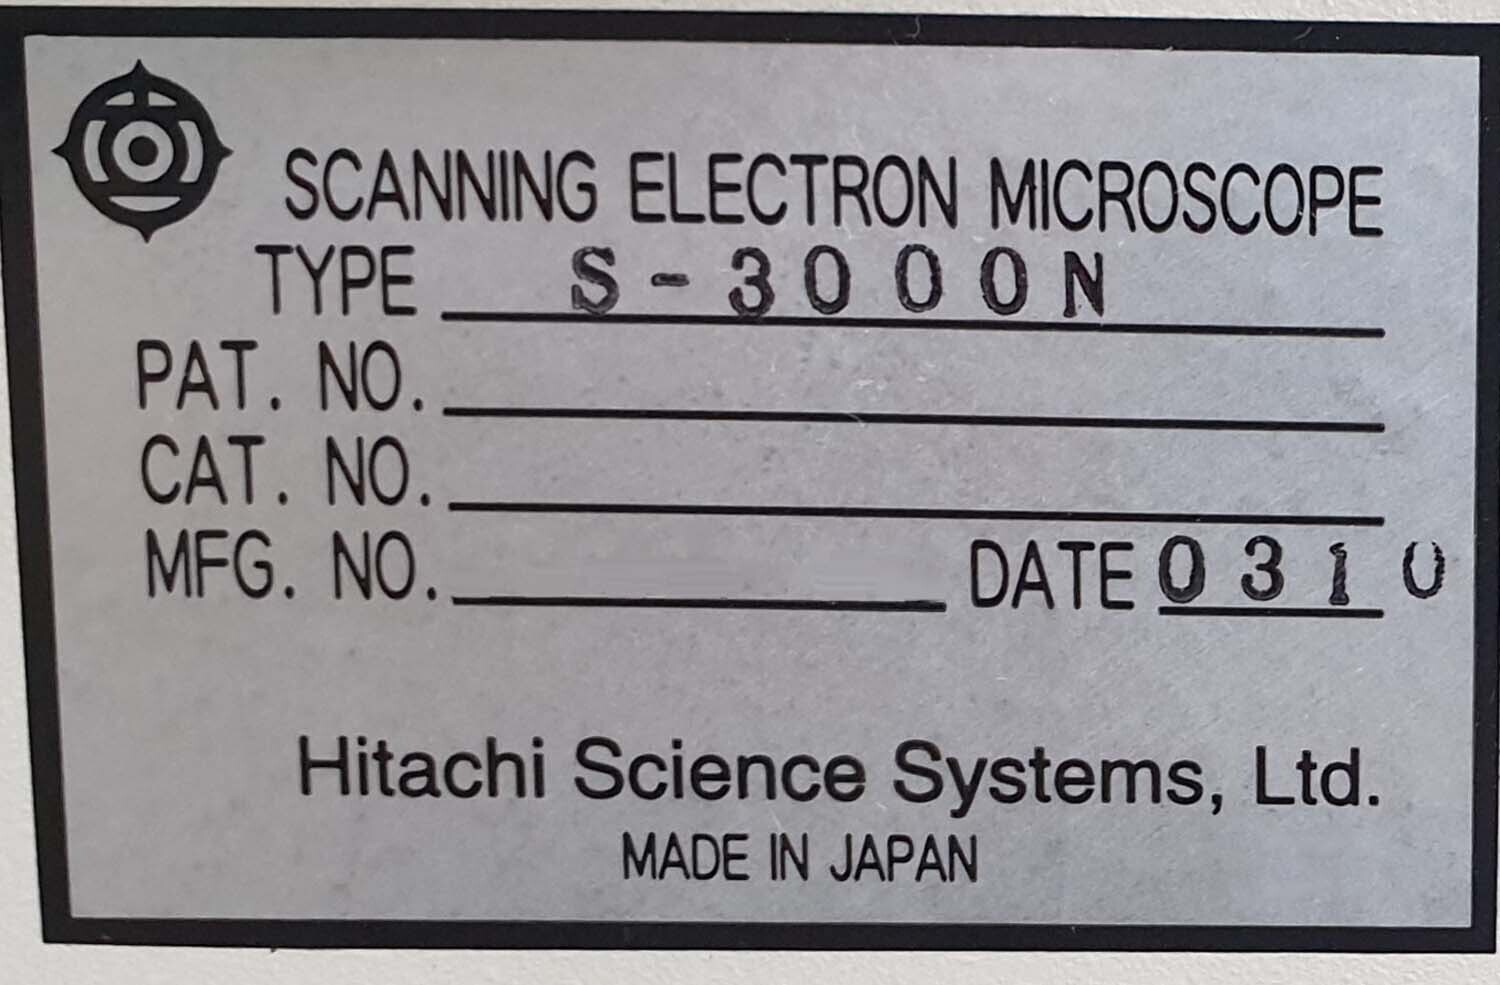 Photo Used HITACHI S-3000N For Sale